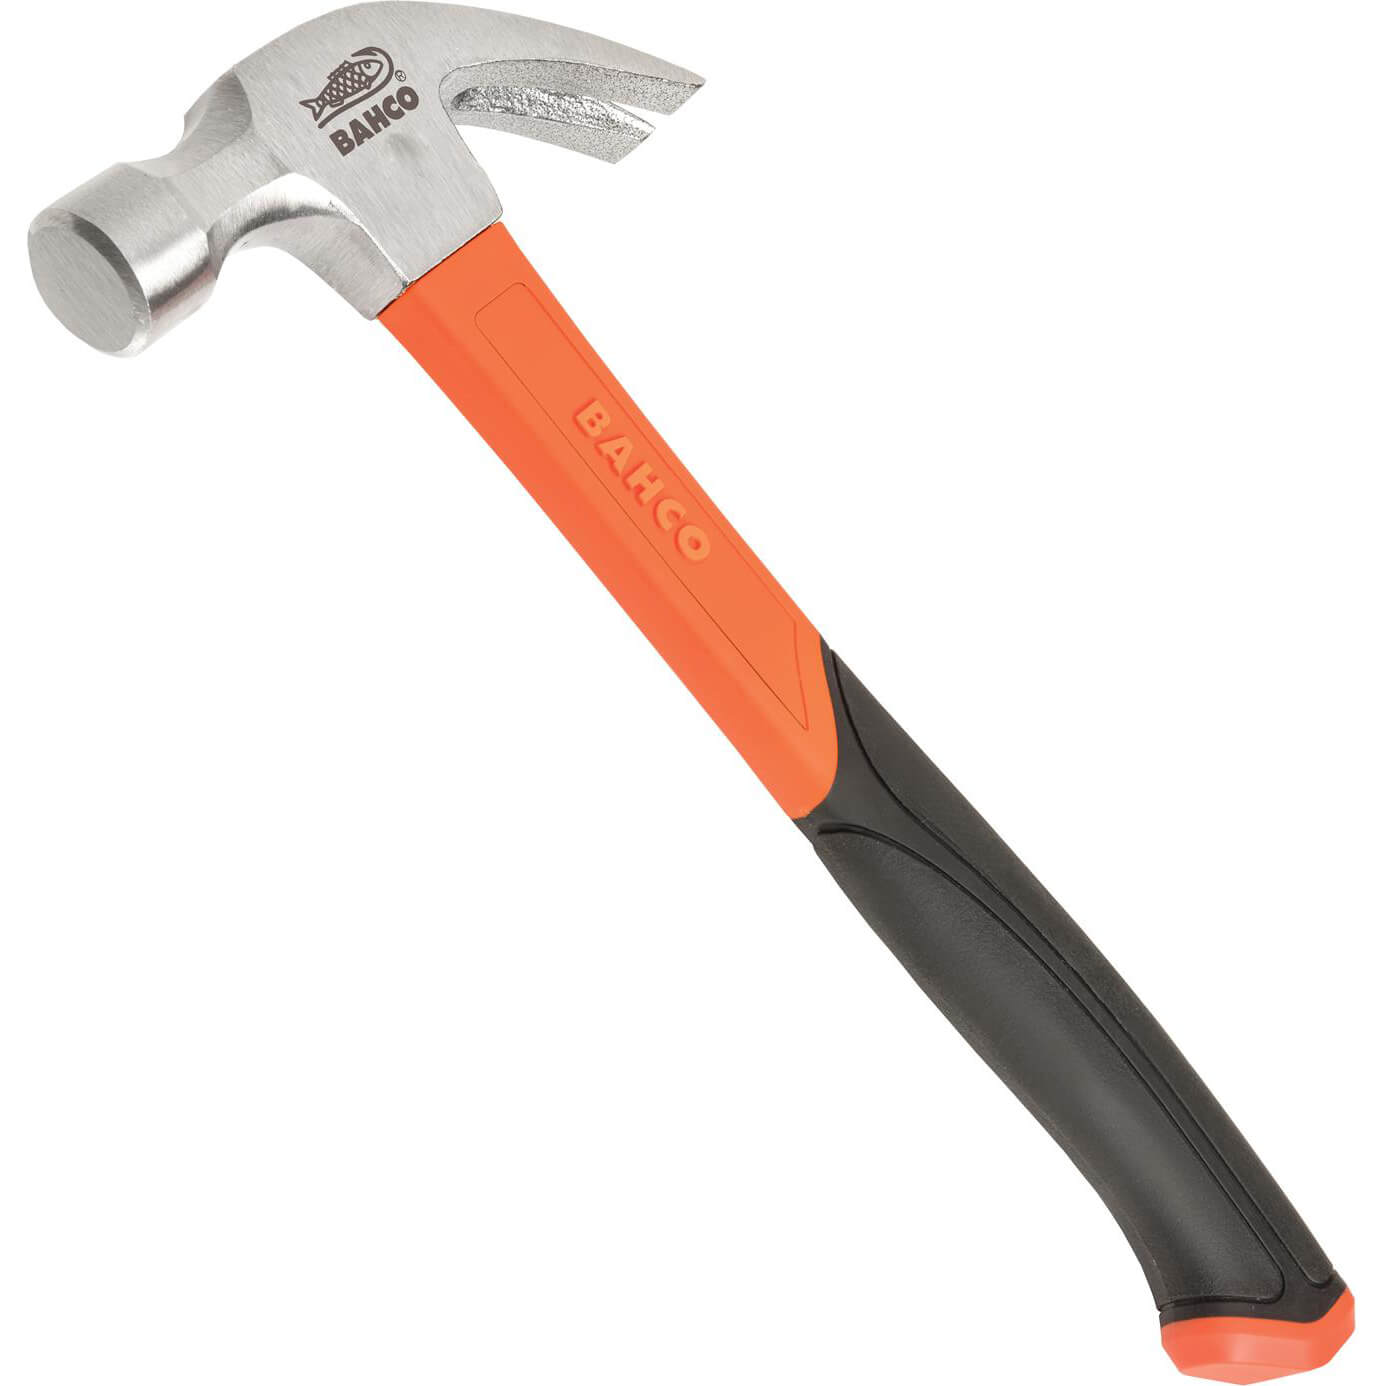 Image of Bahco 428 Curved Fibreglass Claw Hammer 450g